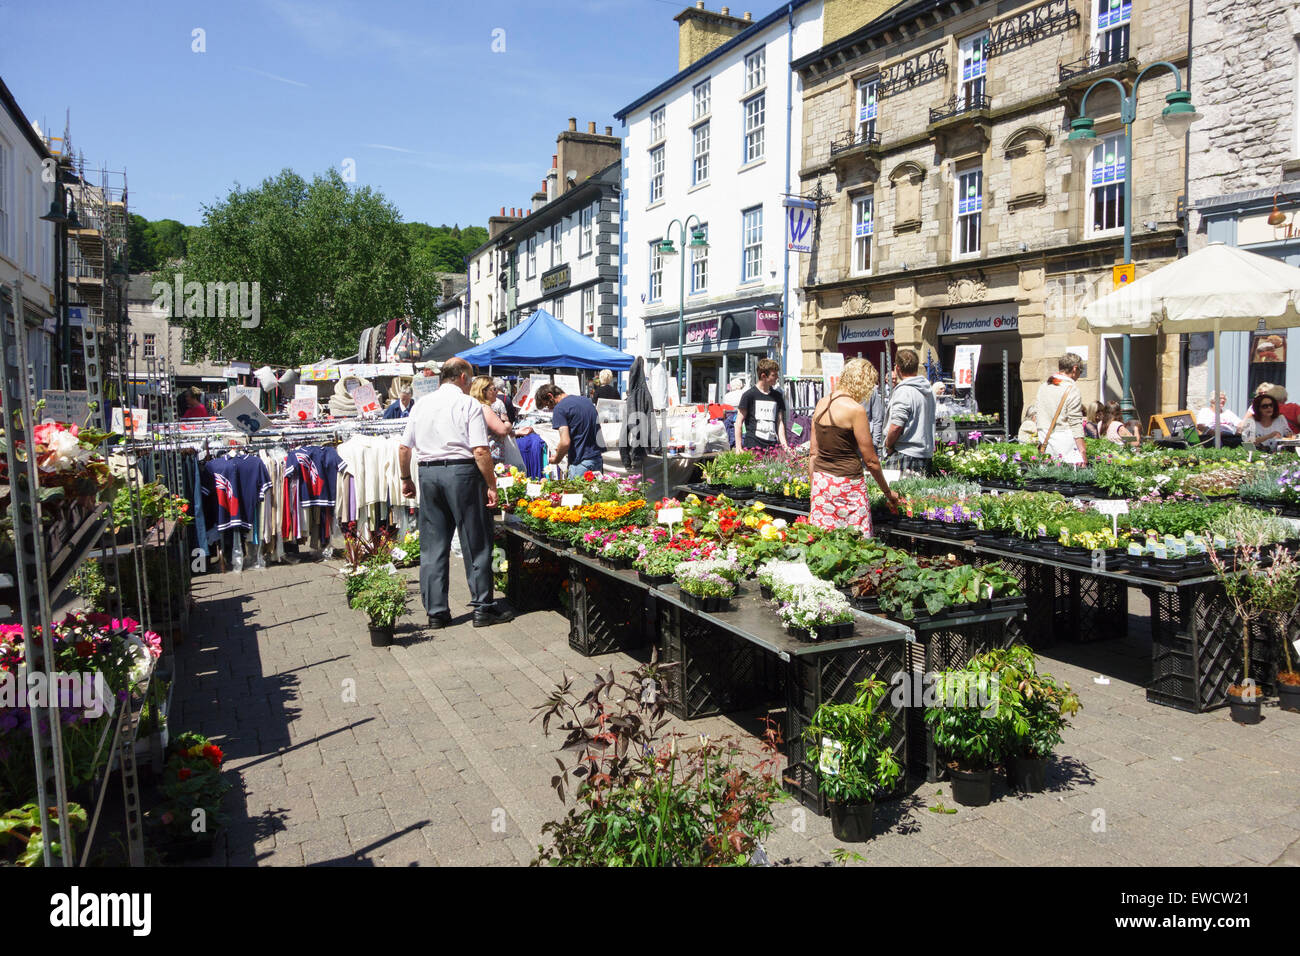 Shoppers browse the goods on offer at the Kendal outdoor market, South Lakeland, Cumbria, England Stock Photo